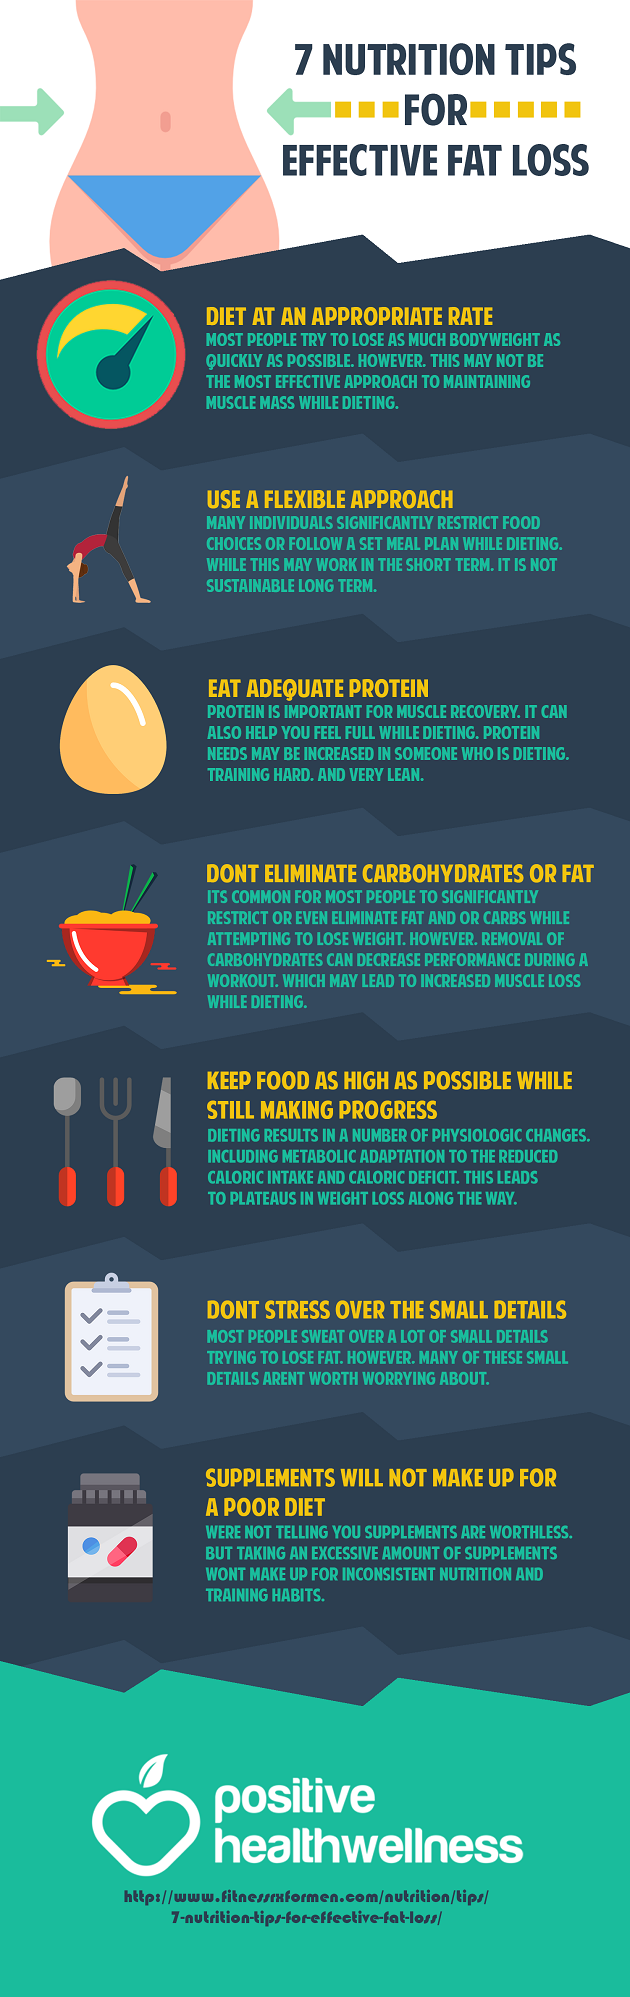 7 Nutrition Tips for Effective Fat Loss